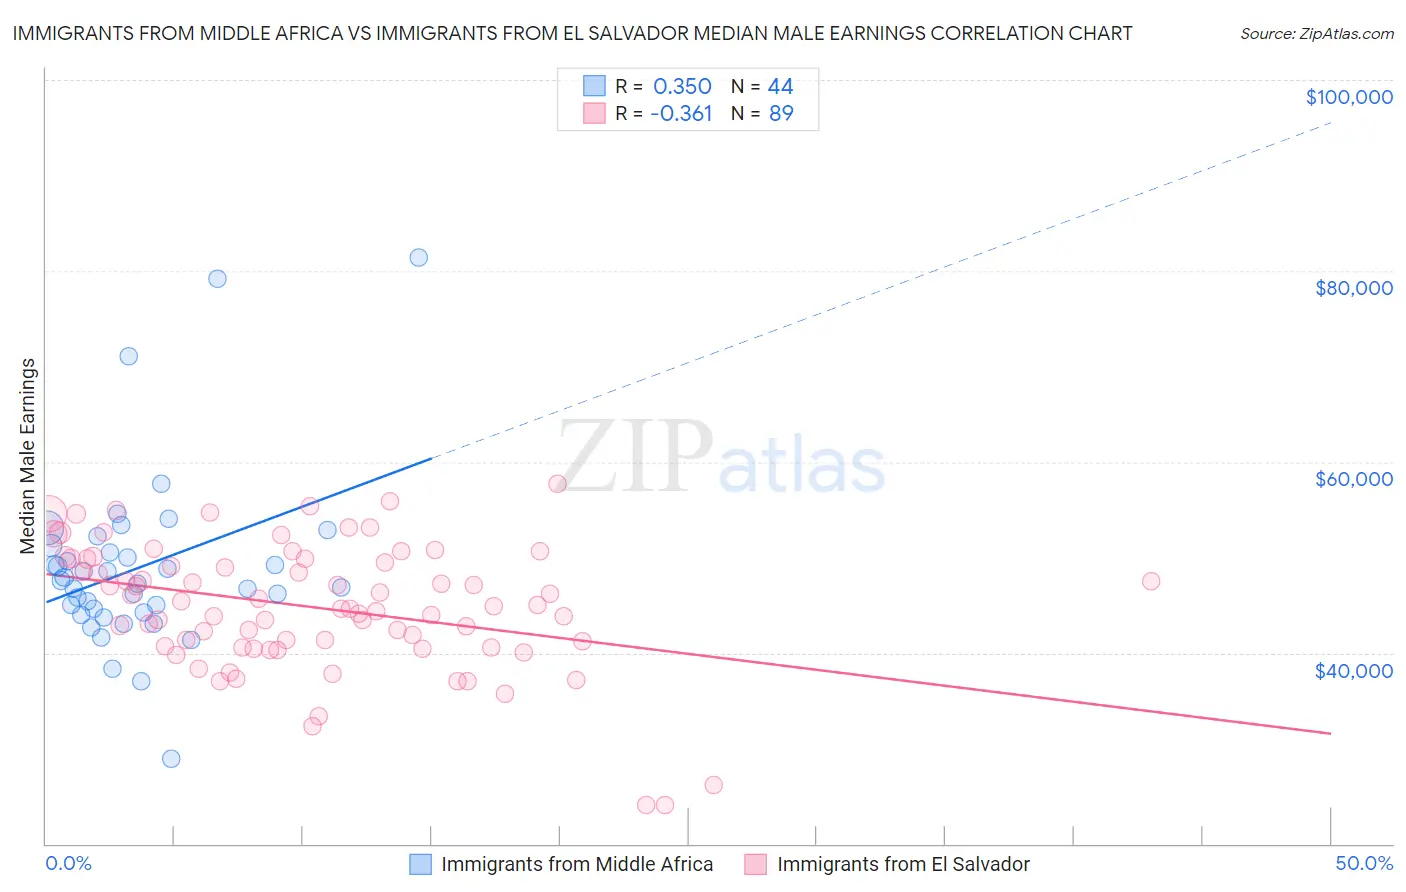 Immigrants from Middle Africa vs Immigrants from El Salvador Median Male Earnings